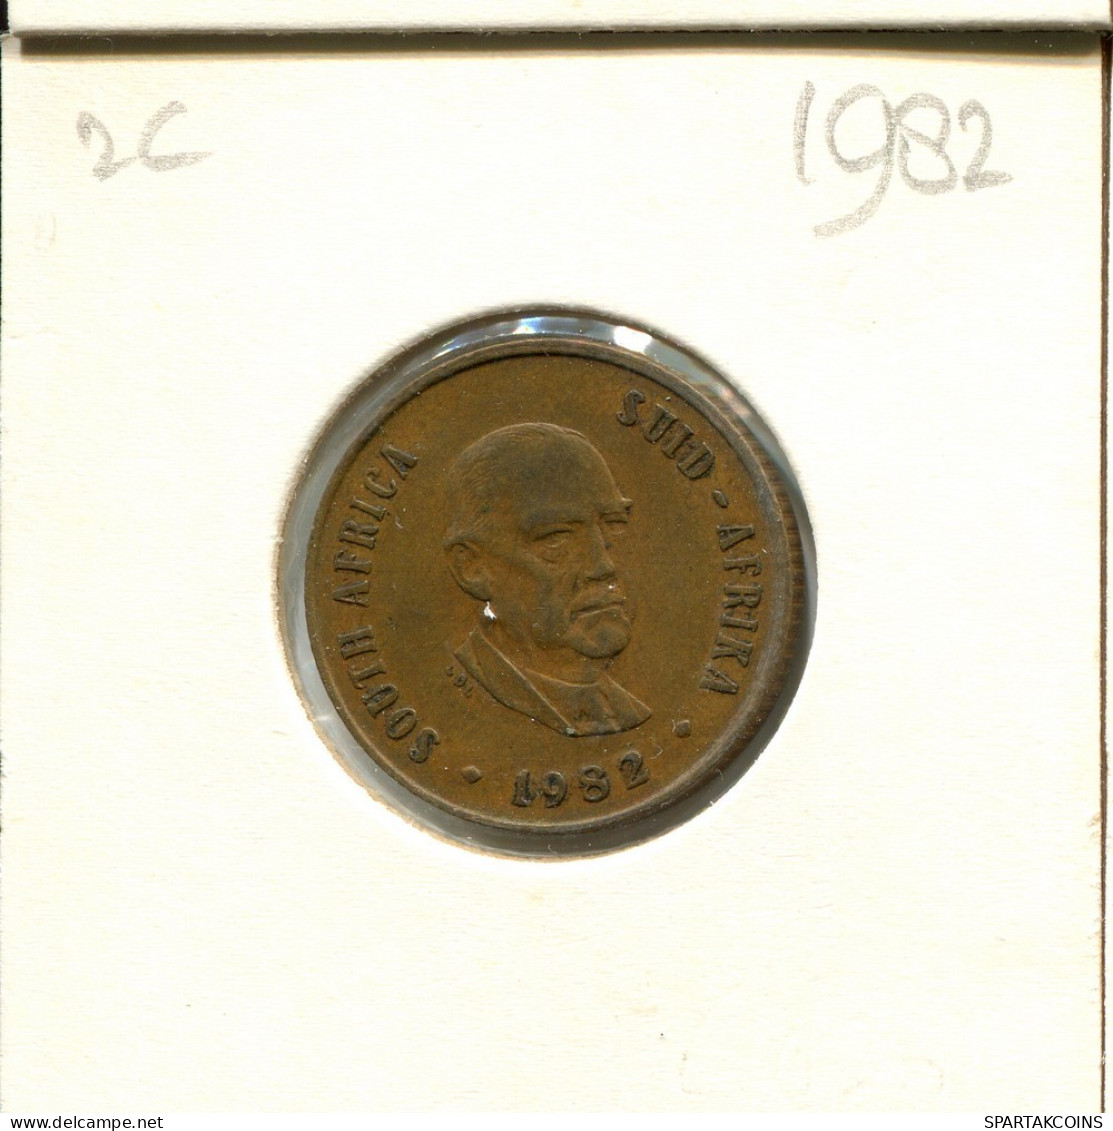 2 CENTS 1982 SOUTH AFRICA Coin #AT093.U.A - Südafrika